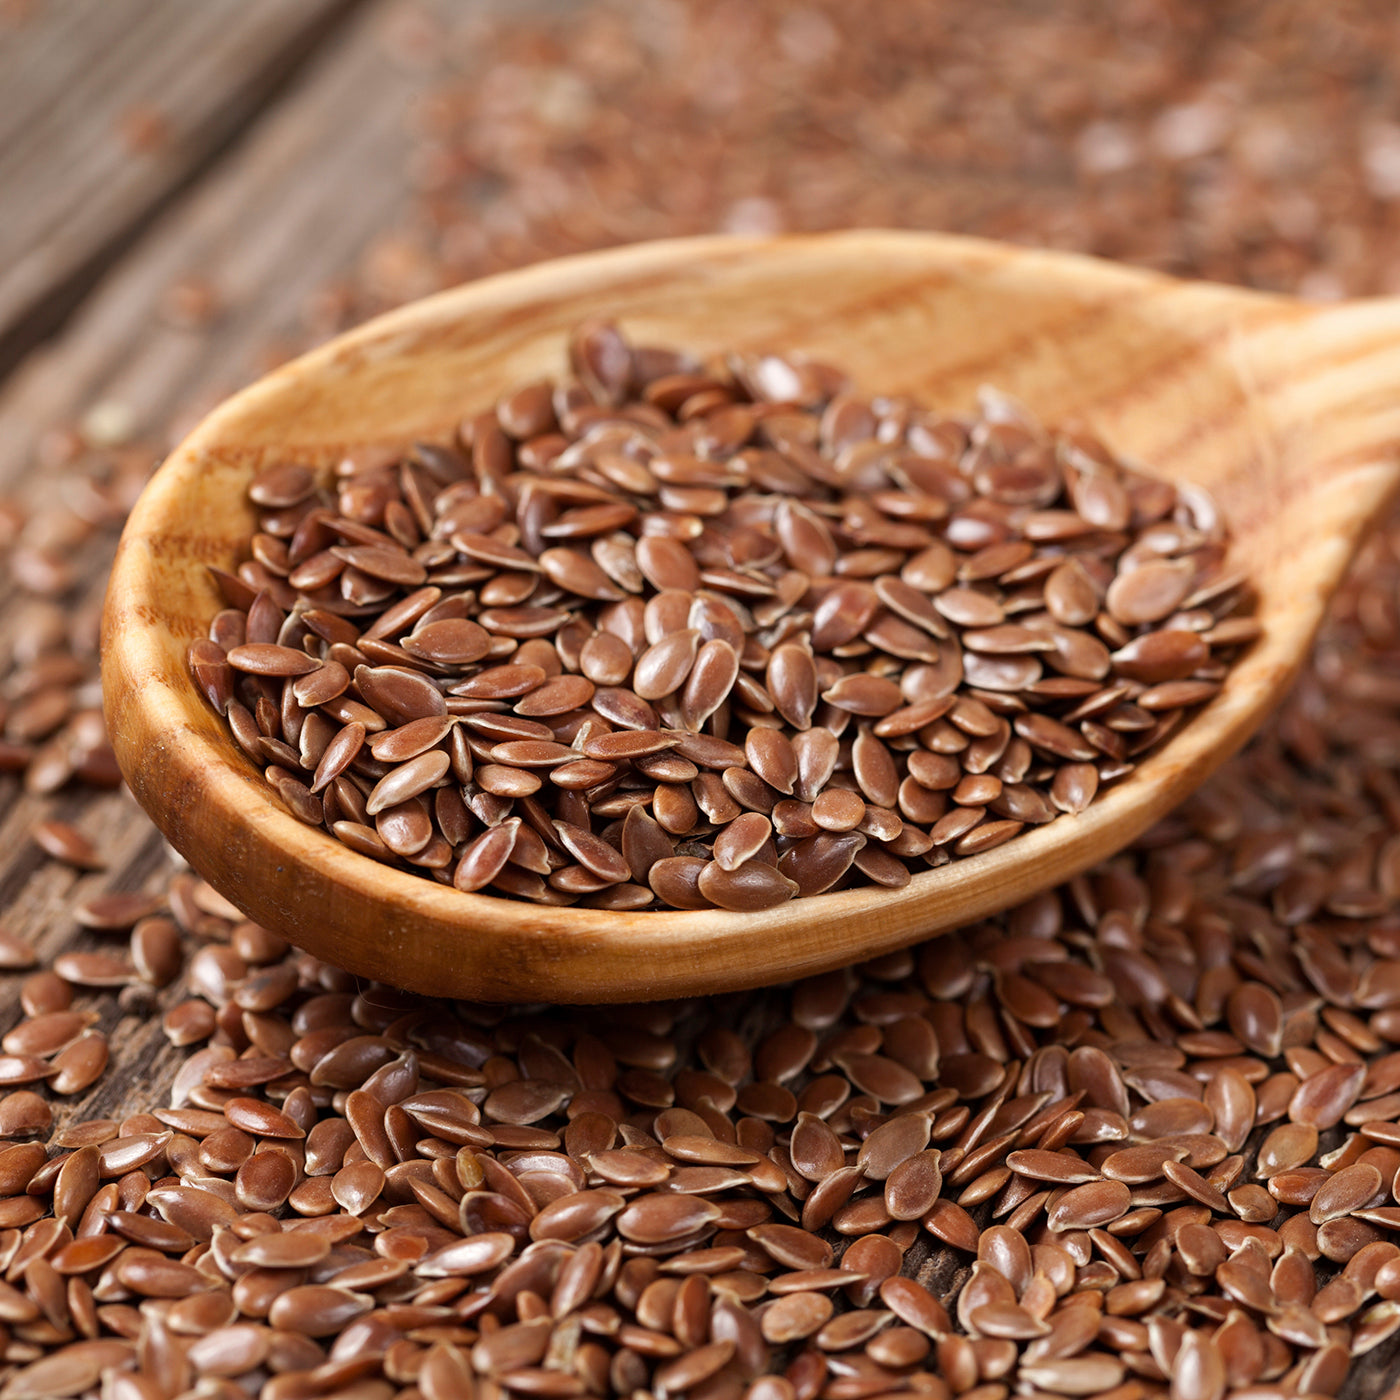  A wooden spoon overflowing with brown flaxseeds set on a backdrop of more flaxseeds on a rustic wooden surface.